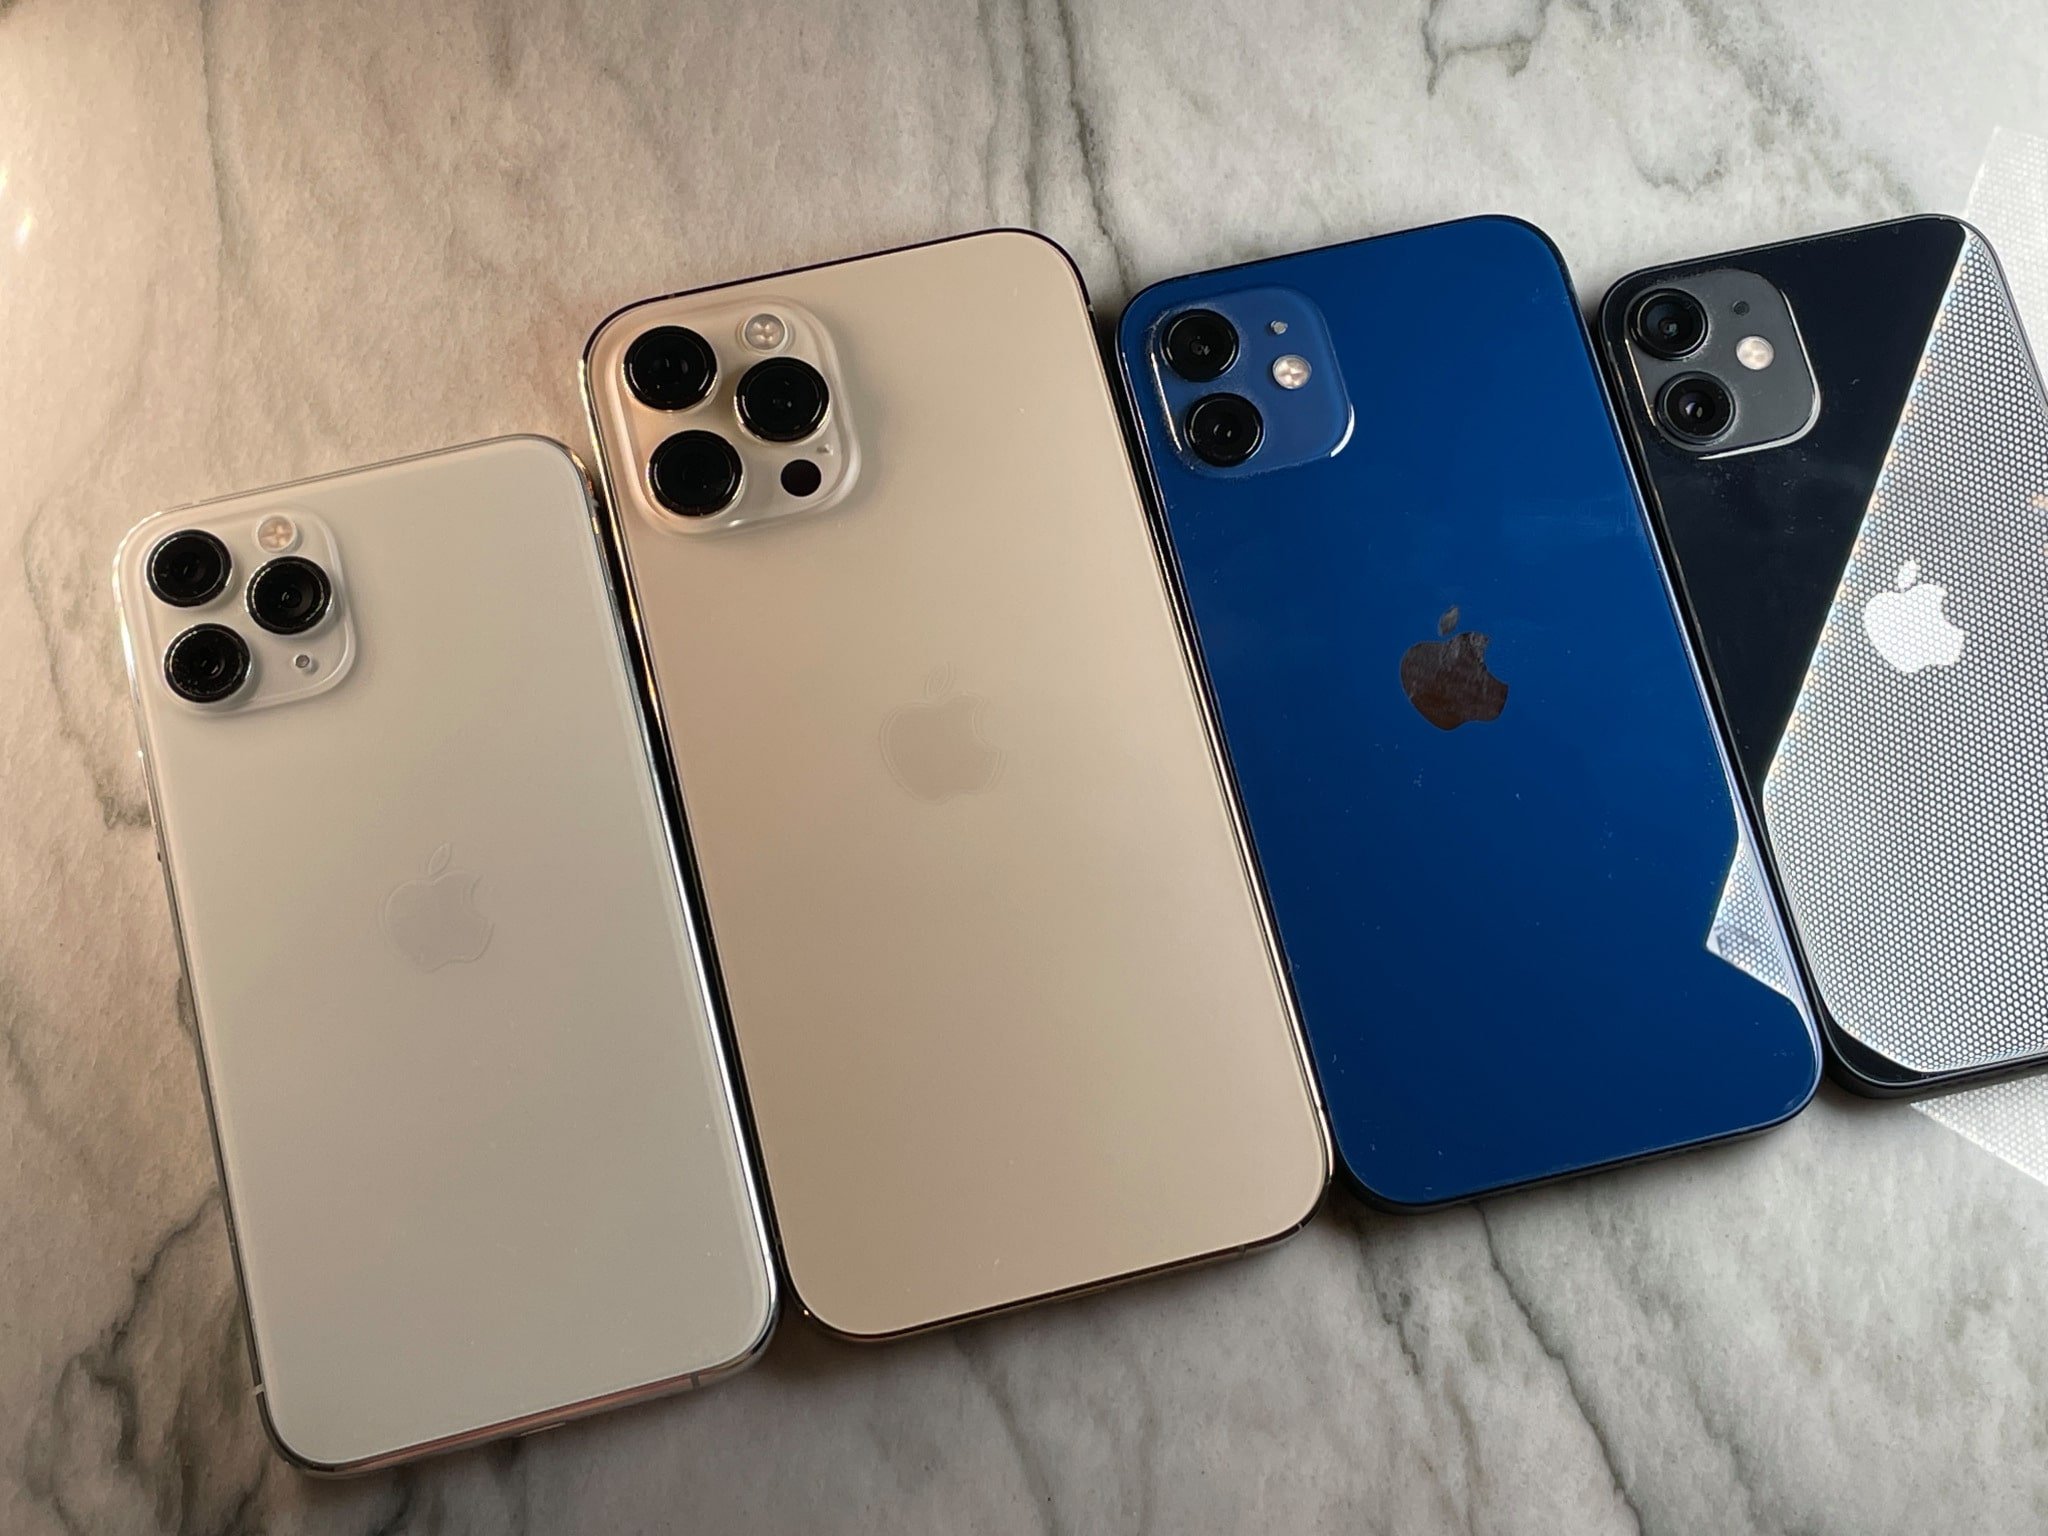 iPhone 12 Pro Max Review Roundup: Bigger and Better